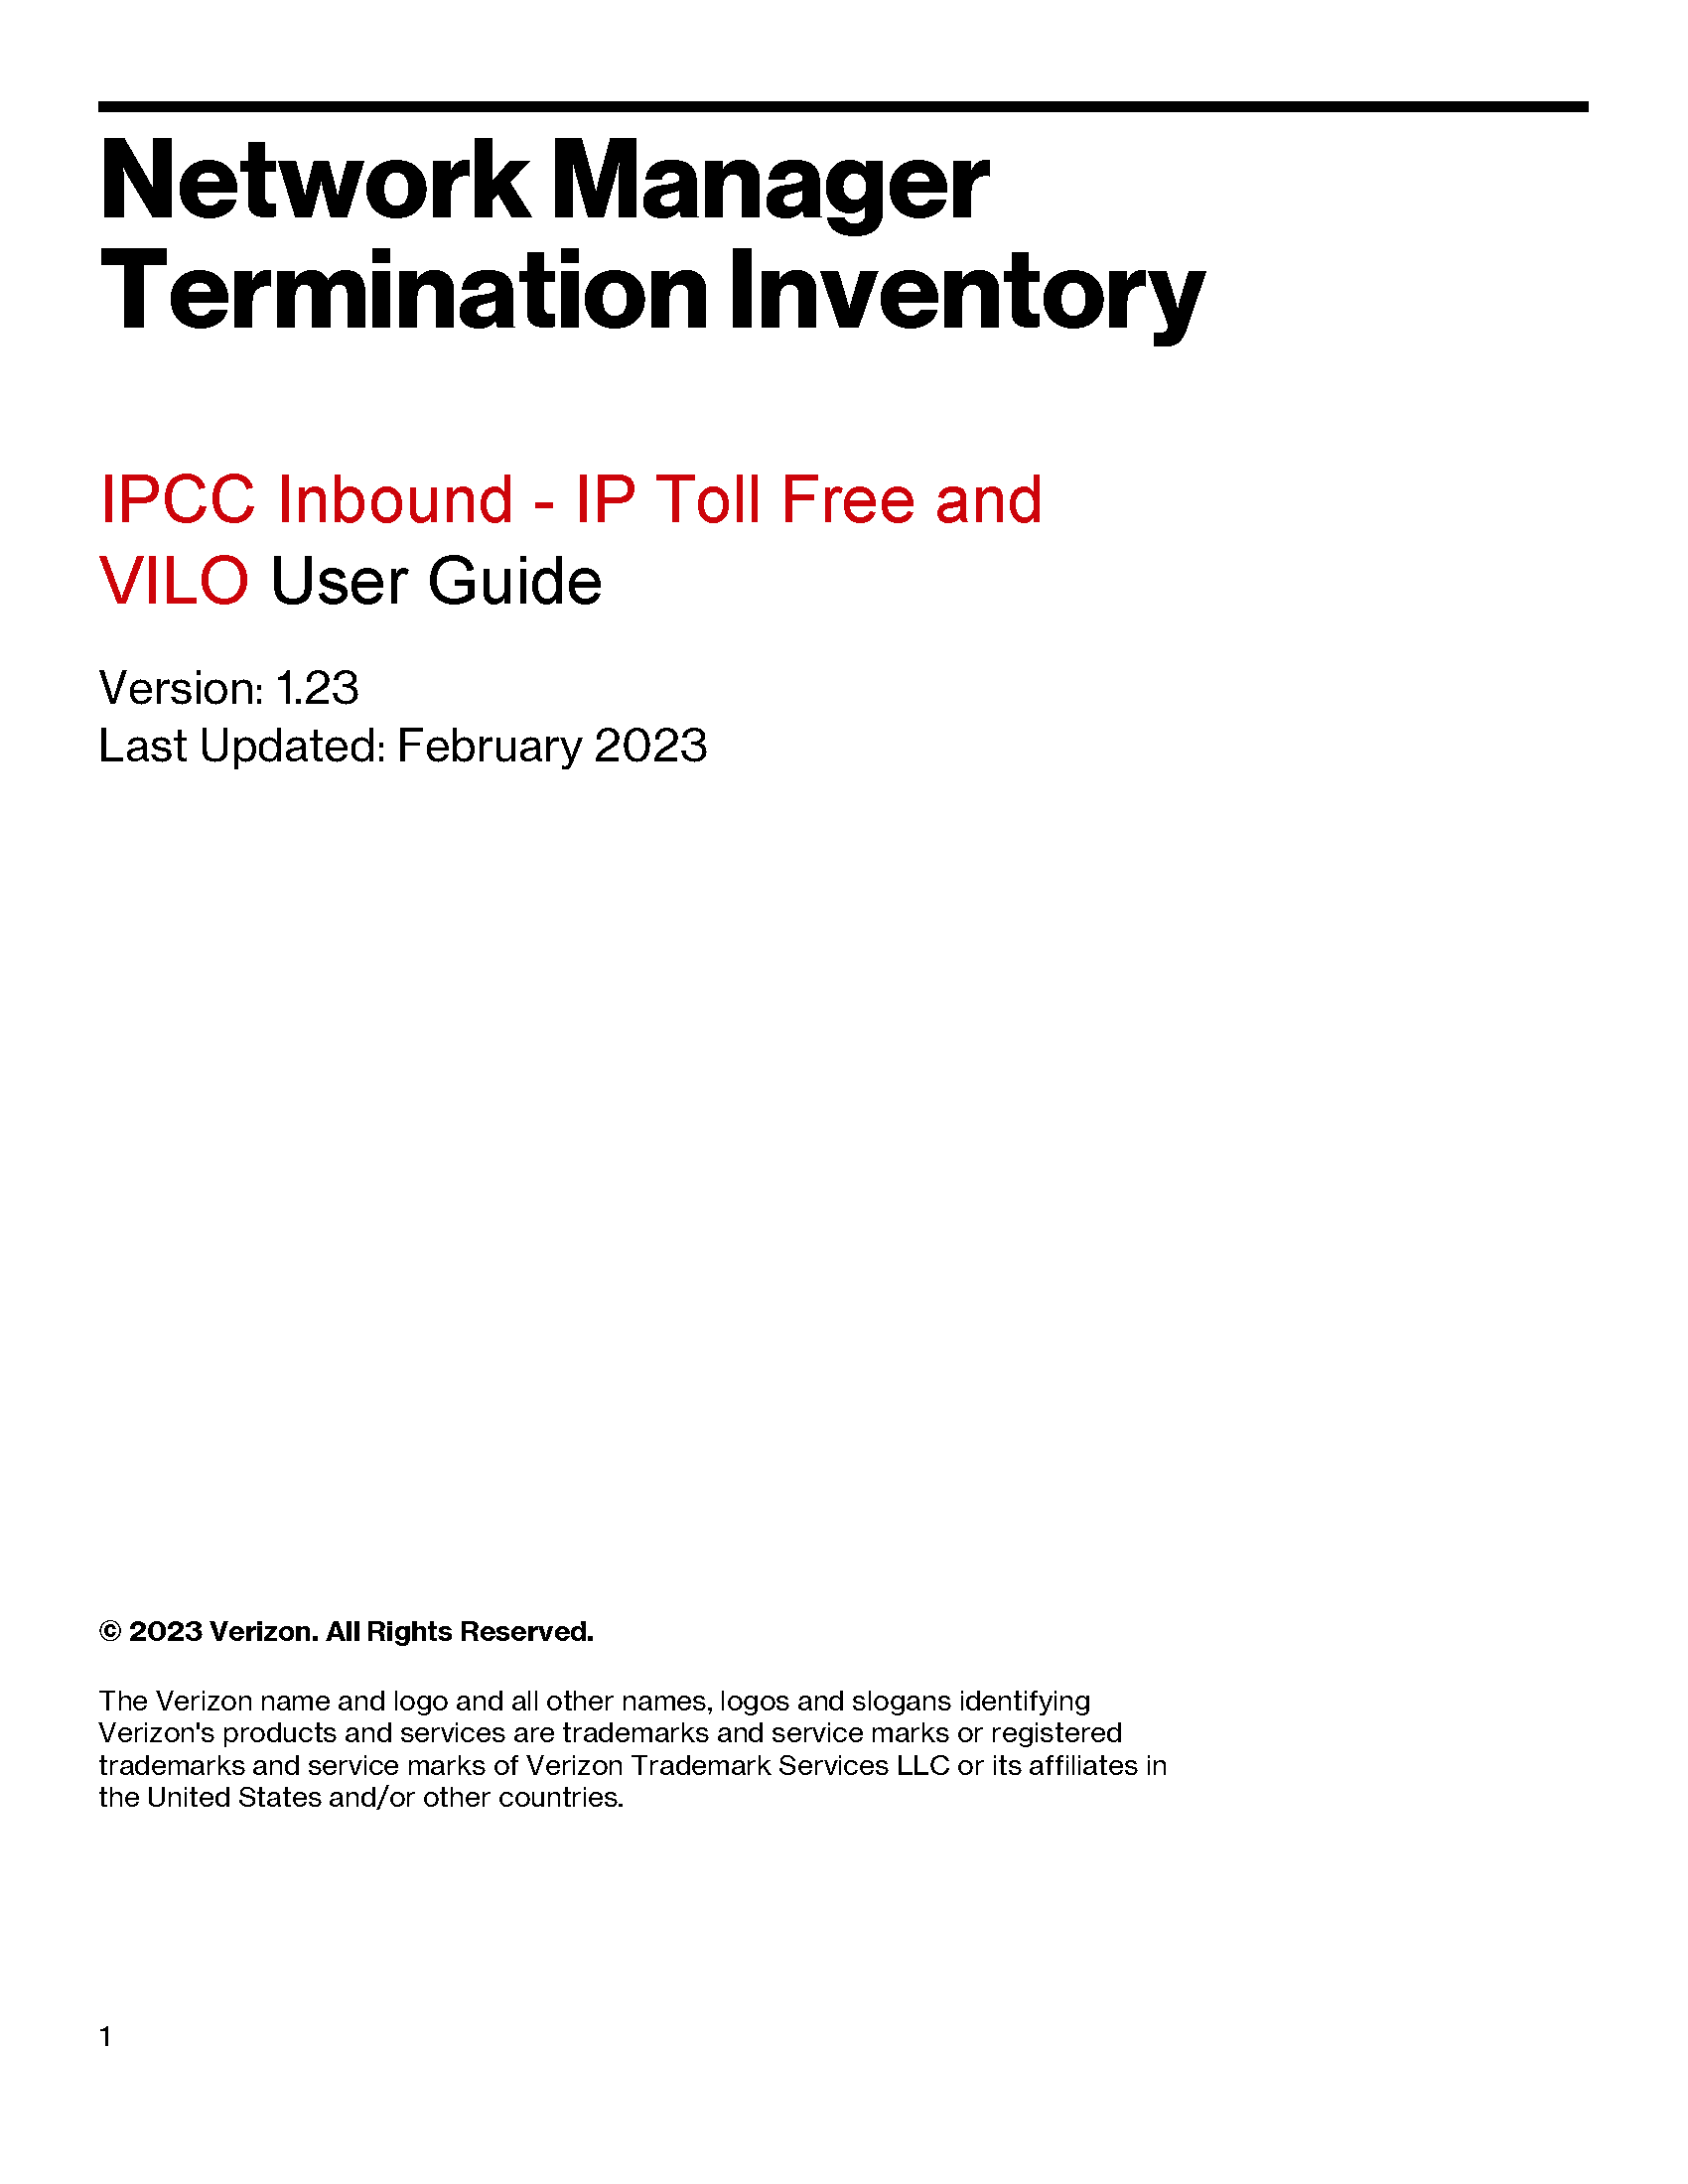 Network Manager Termination Inventory